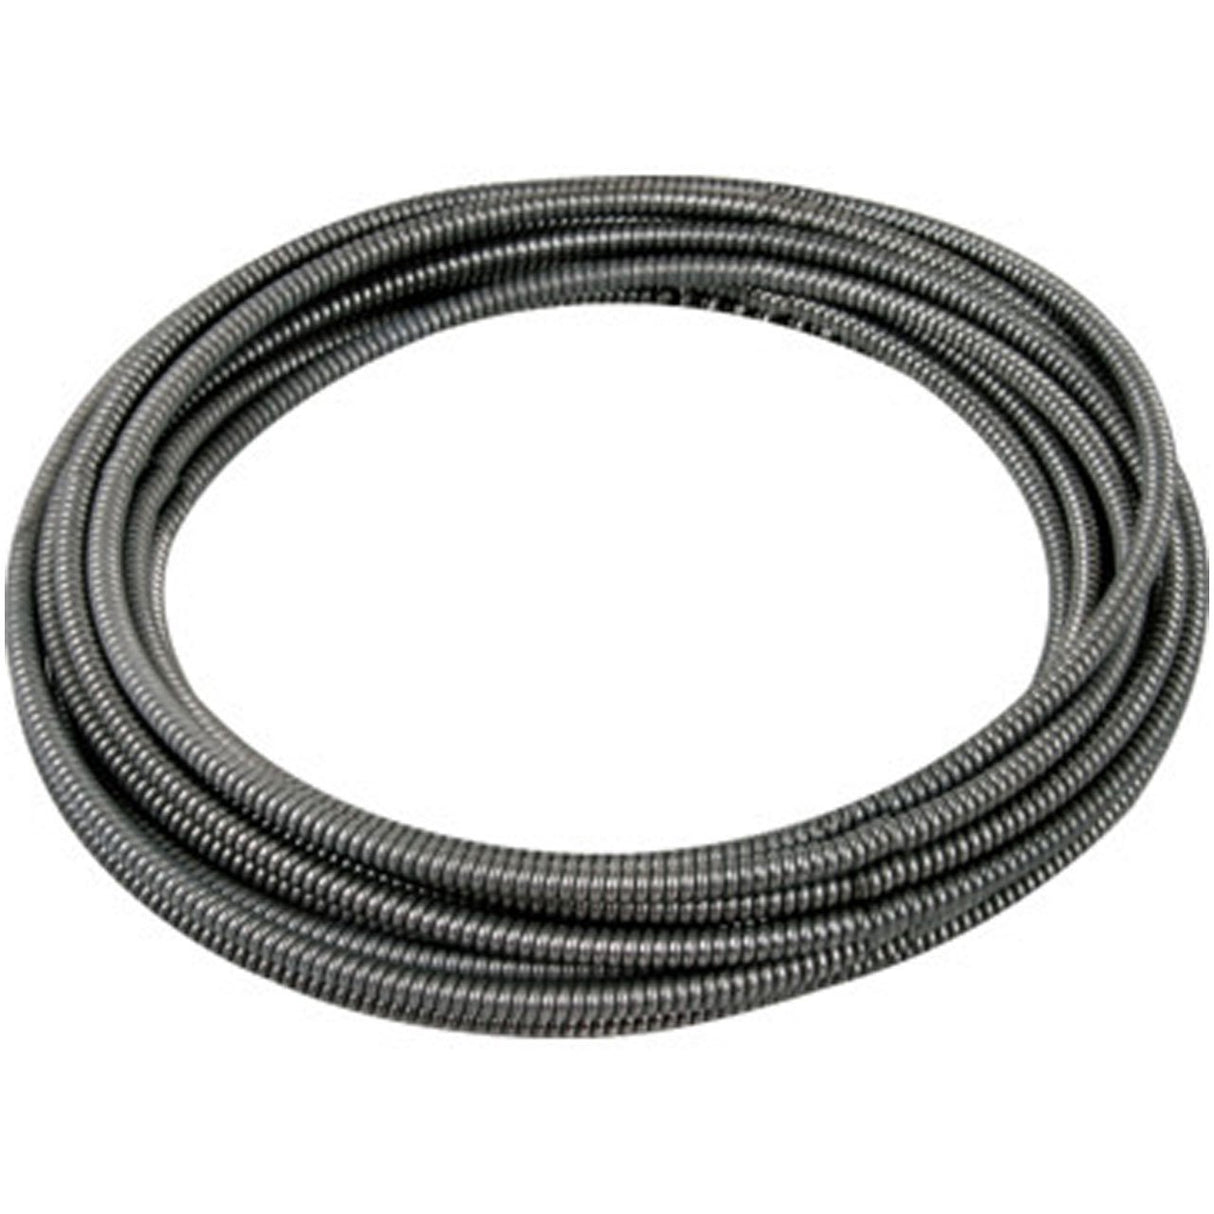 General Wire L-50FL1-DH 50' x 1/4" Down Head Replacement Flexicore Cables for Hand Tools (Handles Sold Separately)